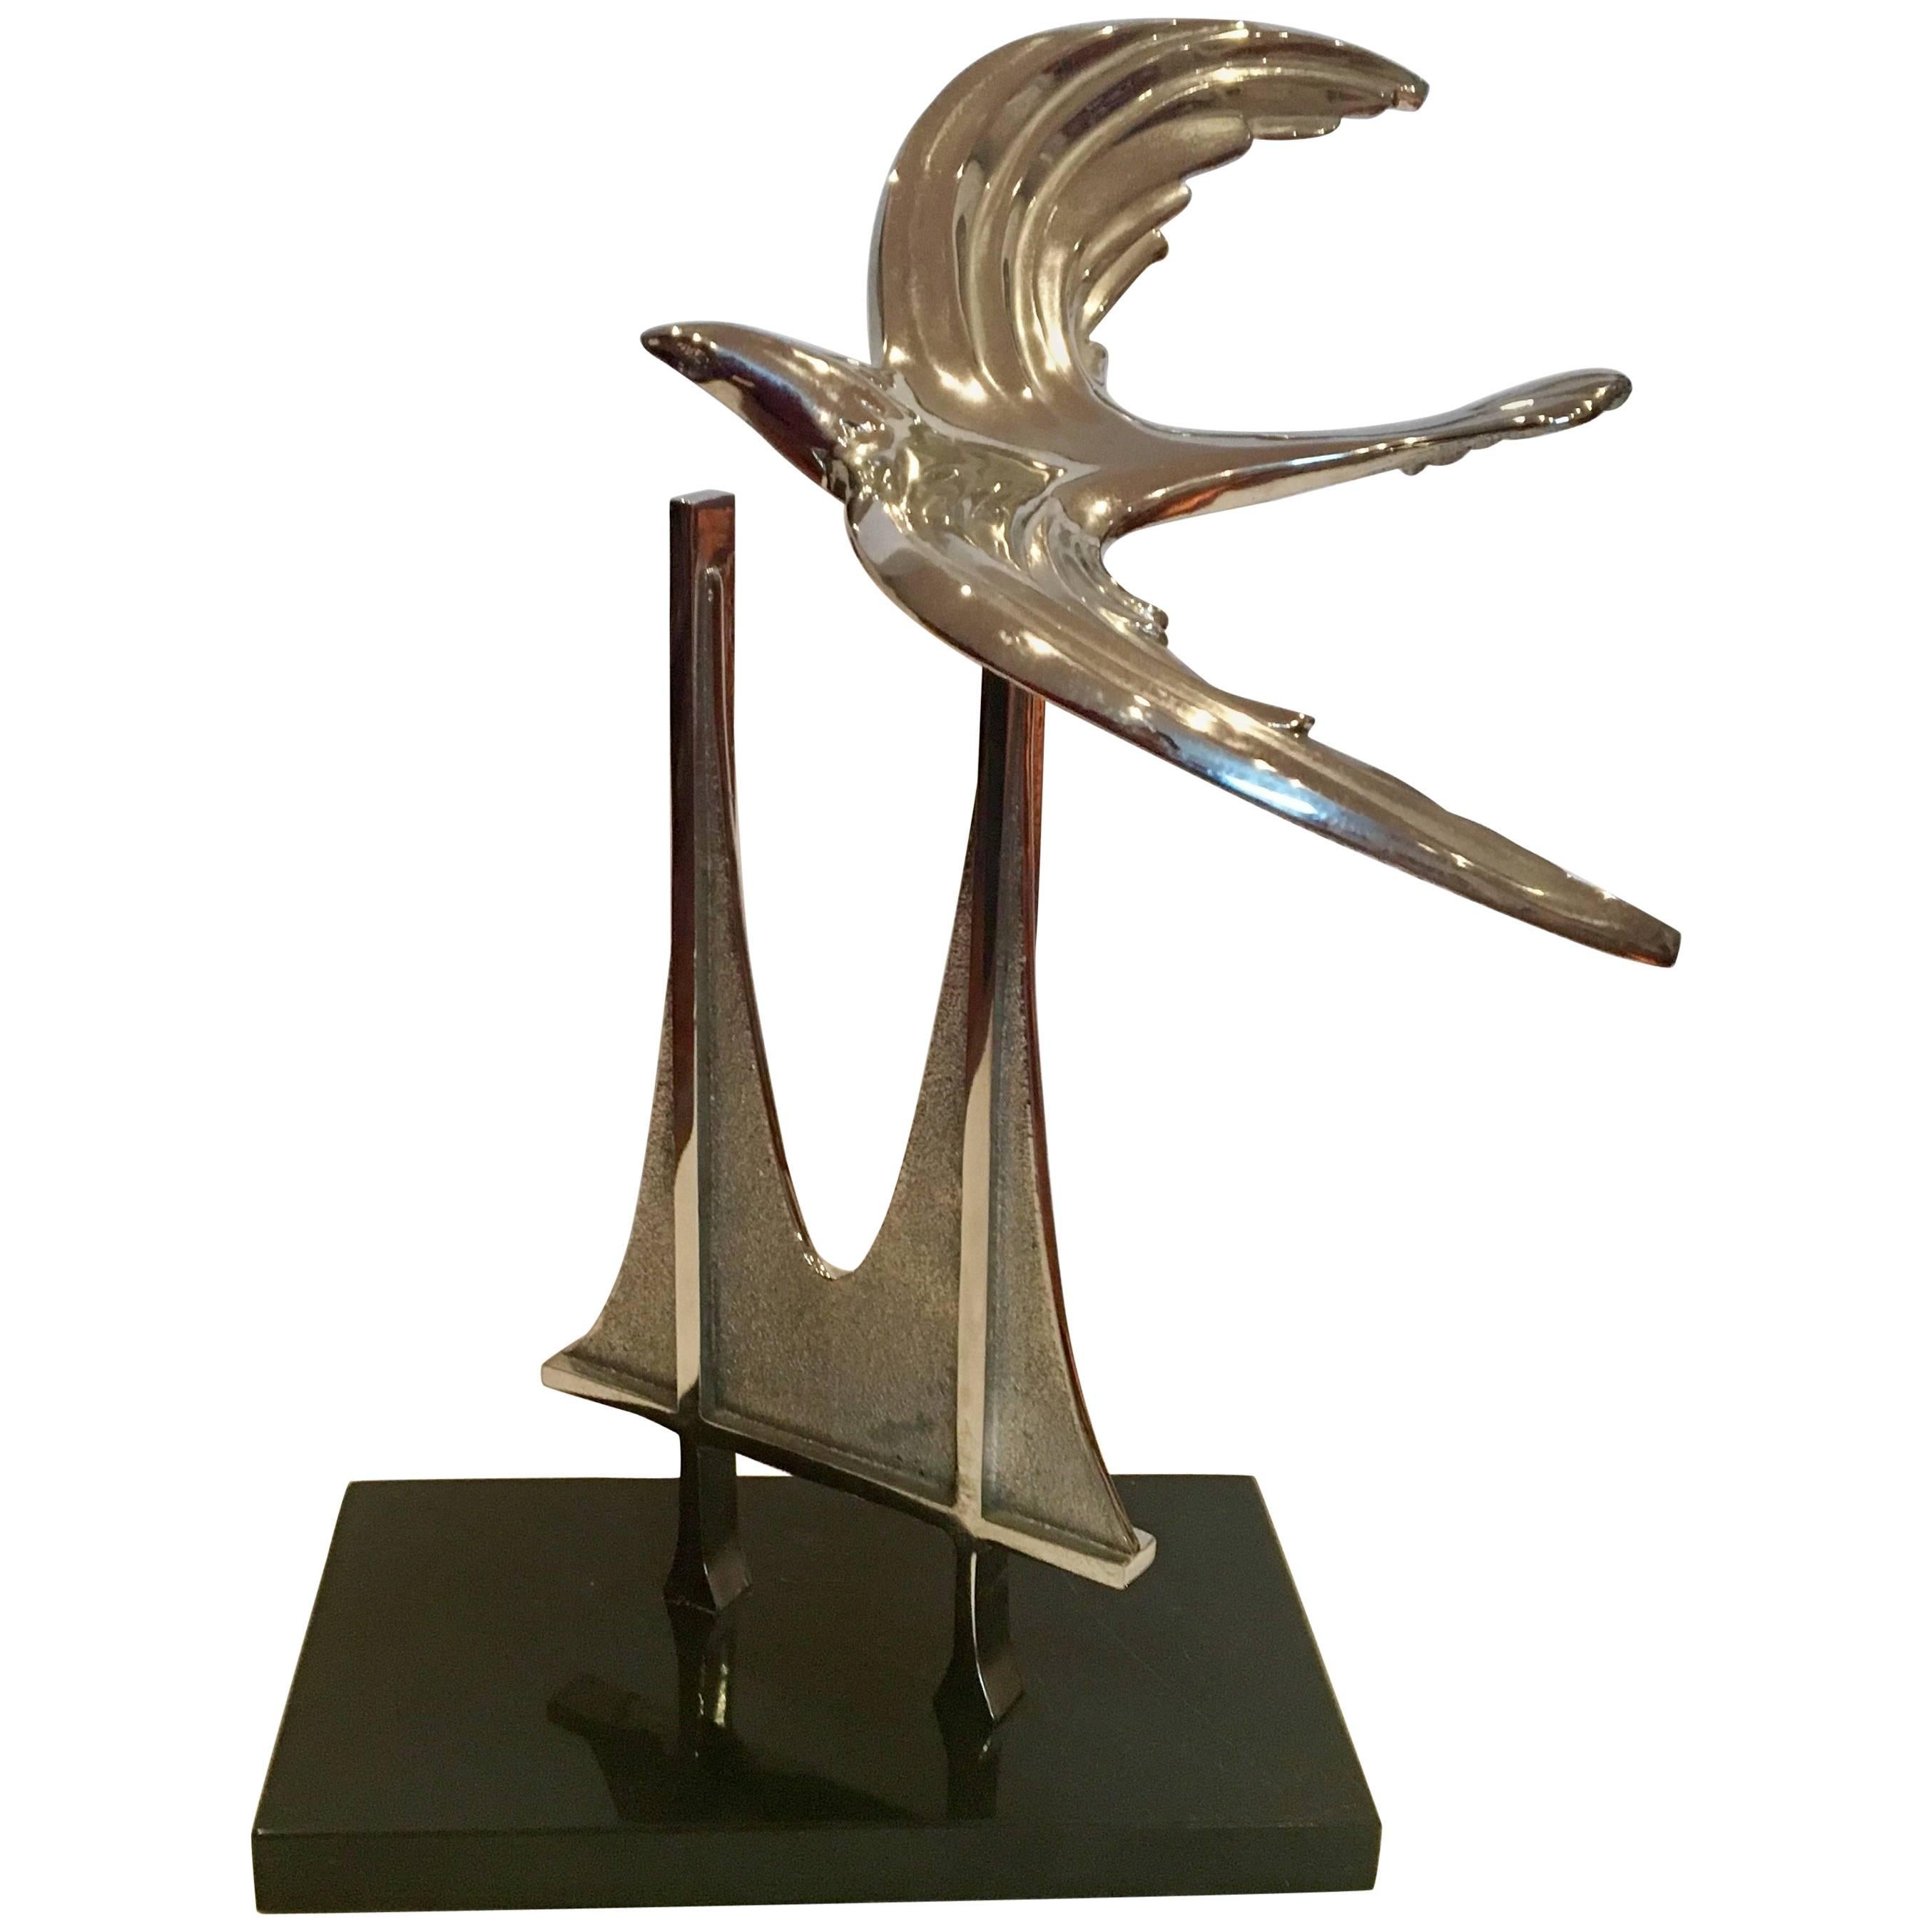 Whimsical Golden Gate Bridge Sculpture by M K Shannon Signed and Numbered